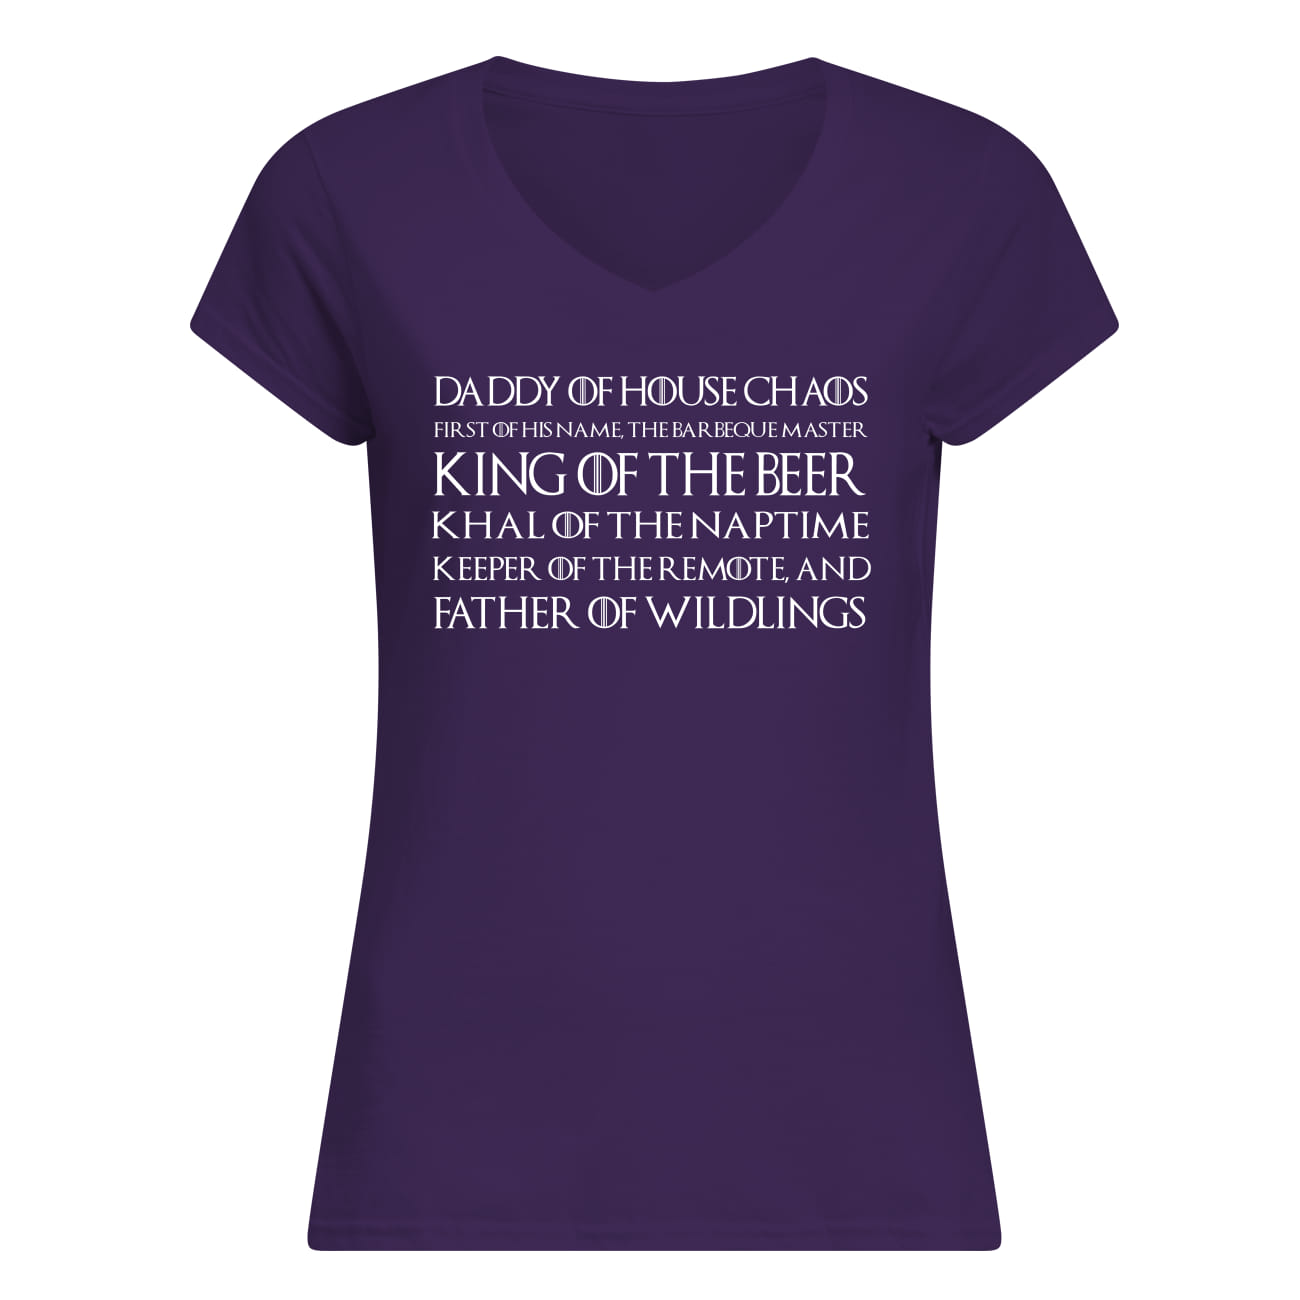 Daddy of house chaos first of his name the barbeque master king of the beer game of thrones lady v-neck